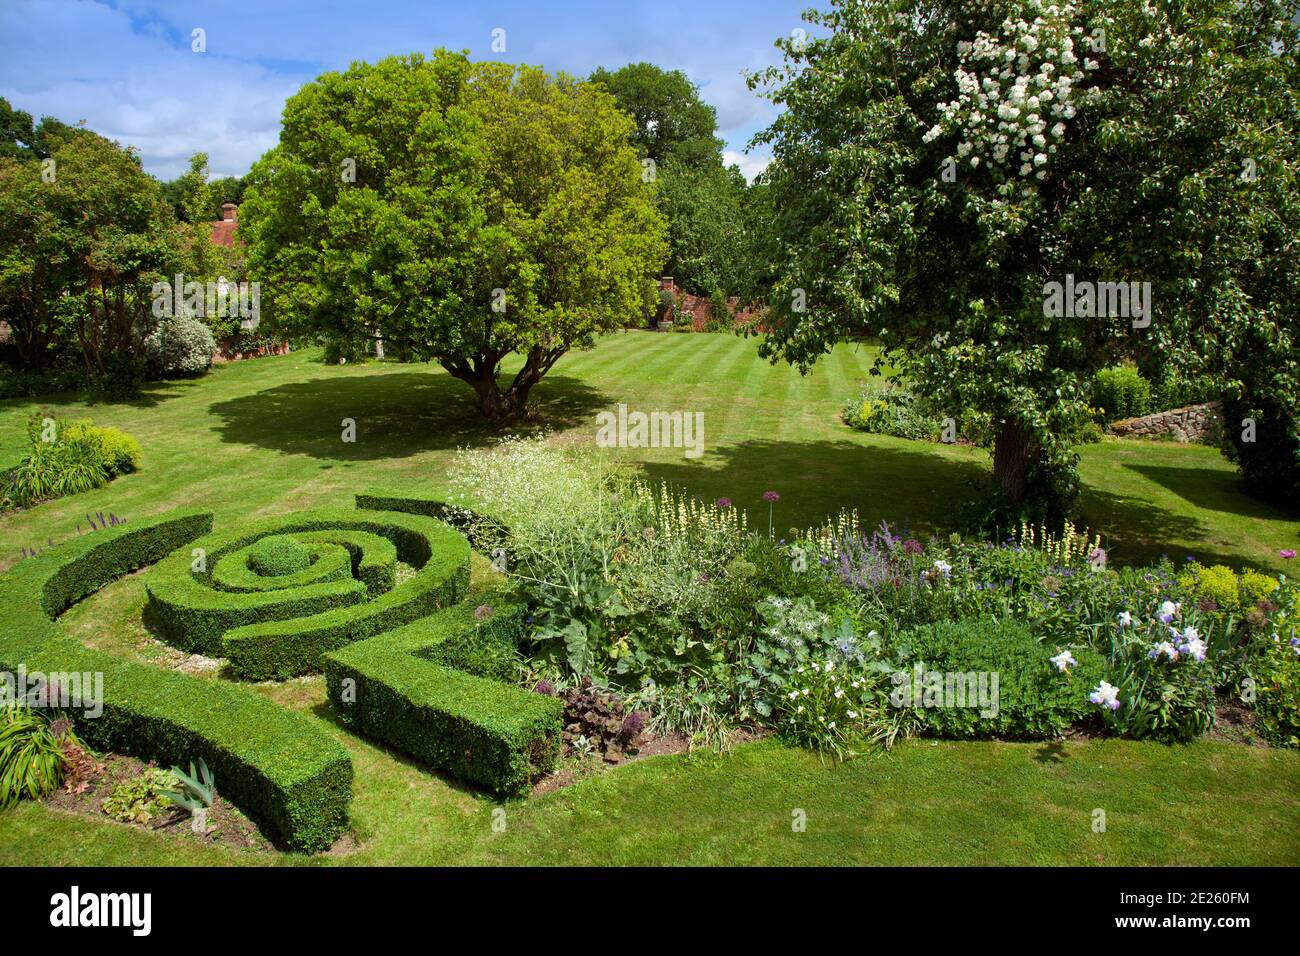 Garden overview with maze-like box hedging, lawn, flower bed and mature trees Stock Photo